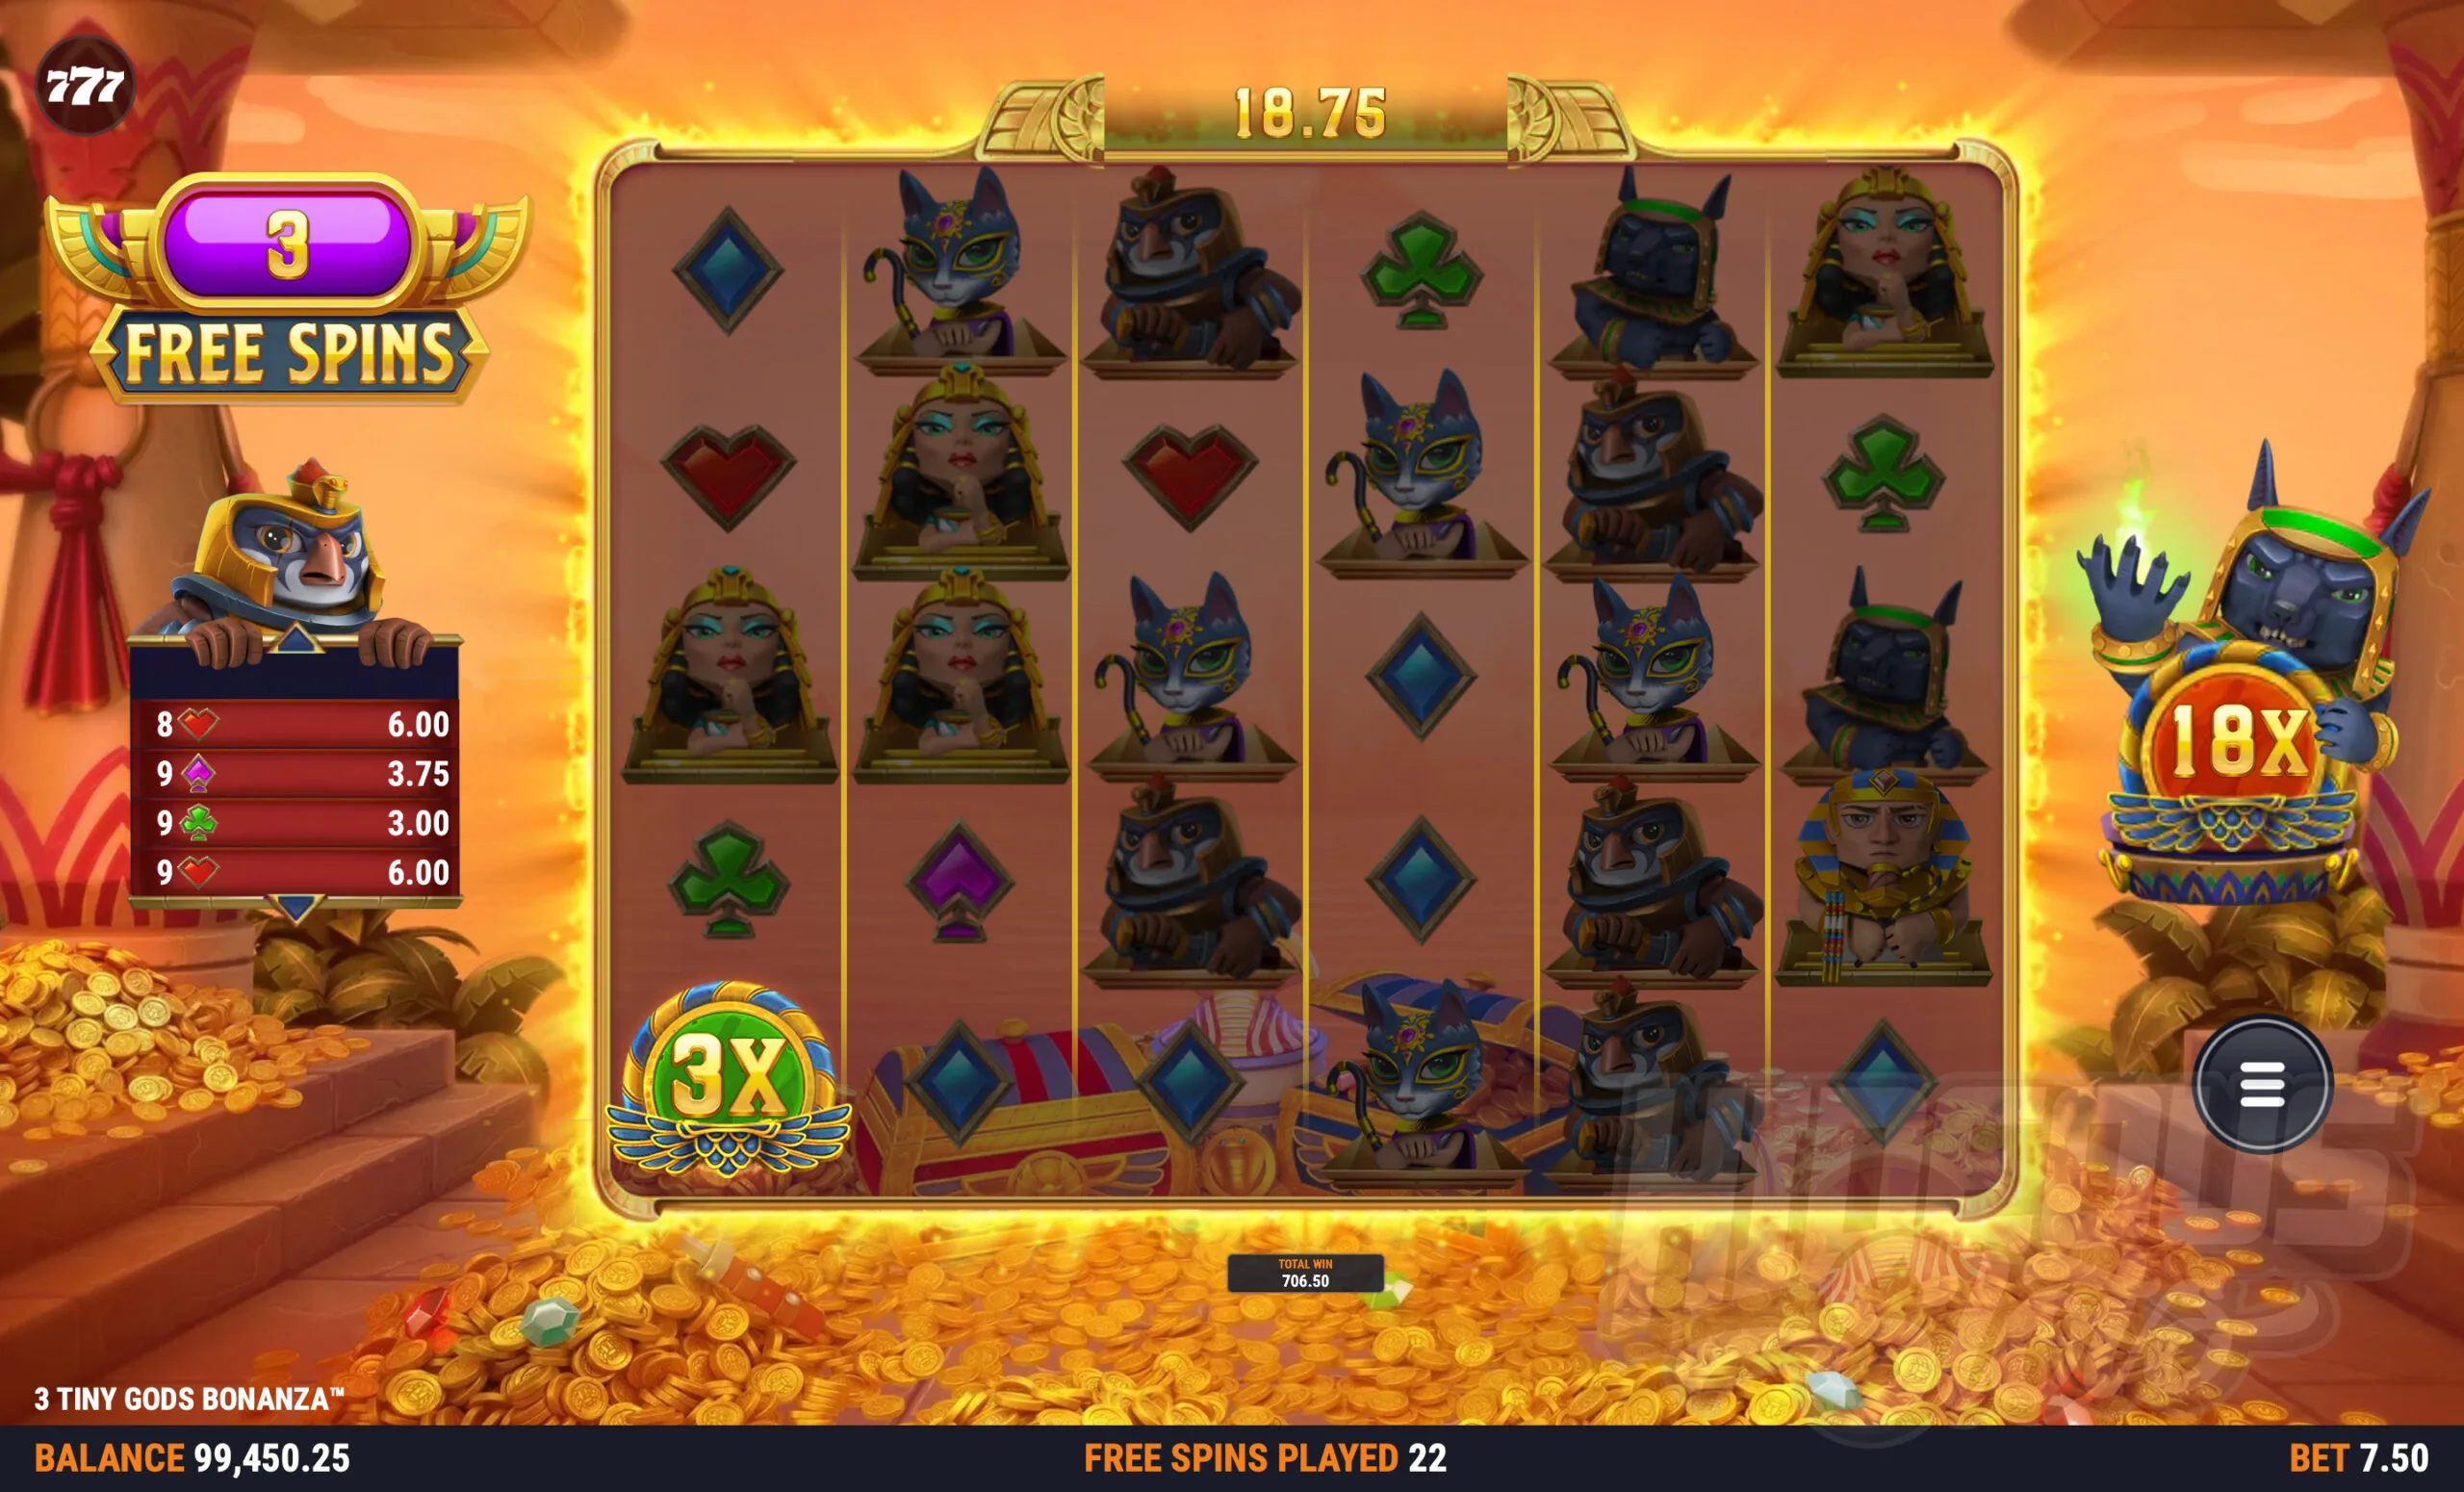 Multiplier Symbol Values are Added to the Total Win Multiplier During Free Spins